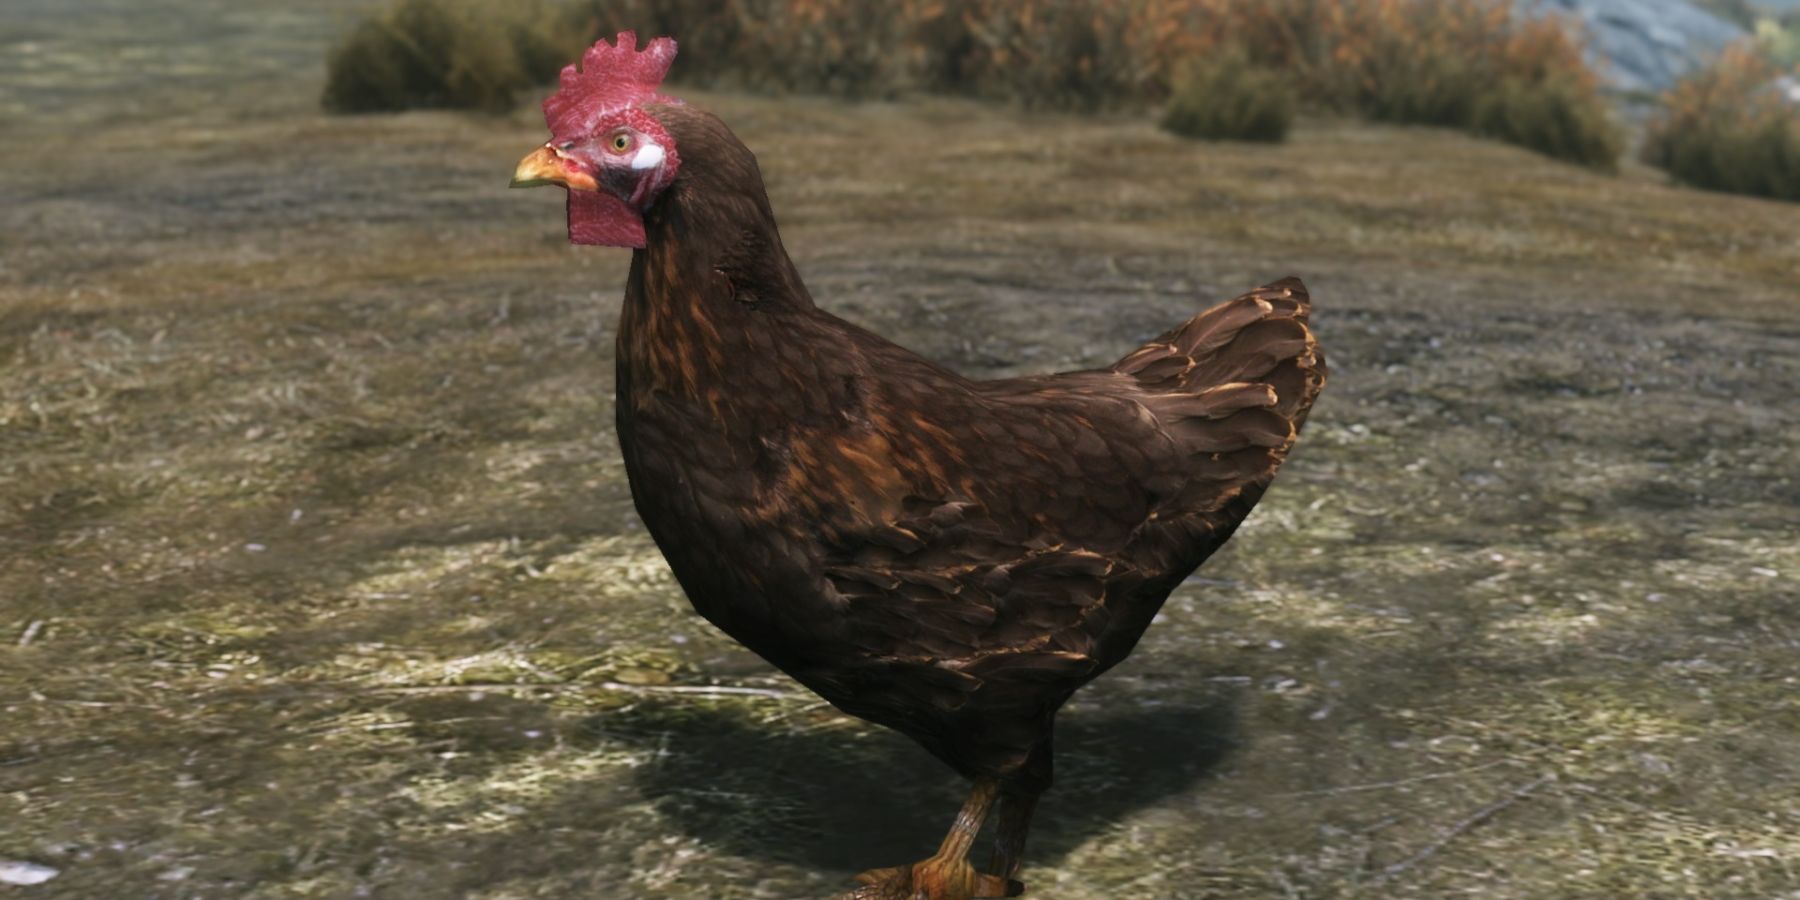 A screenshot from Skyrim showing an in-game chicken.